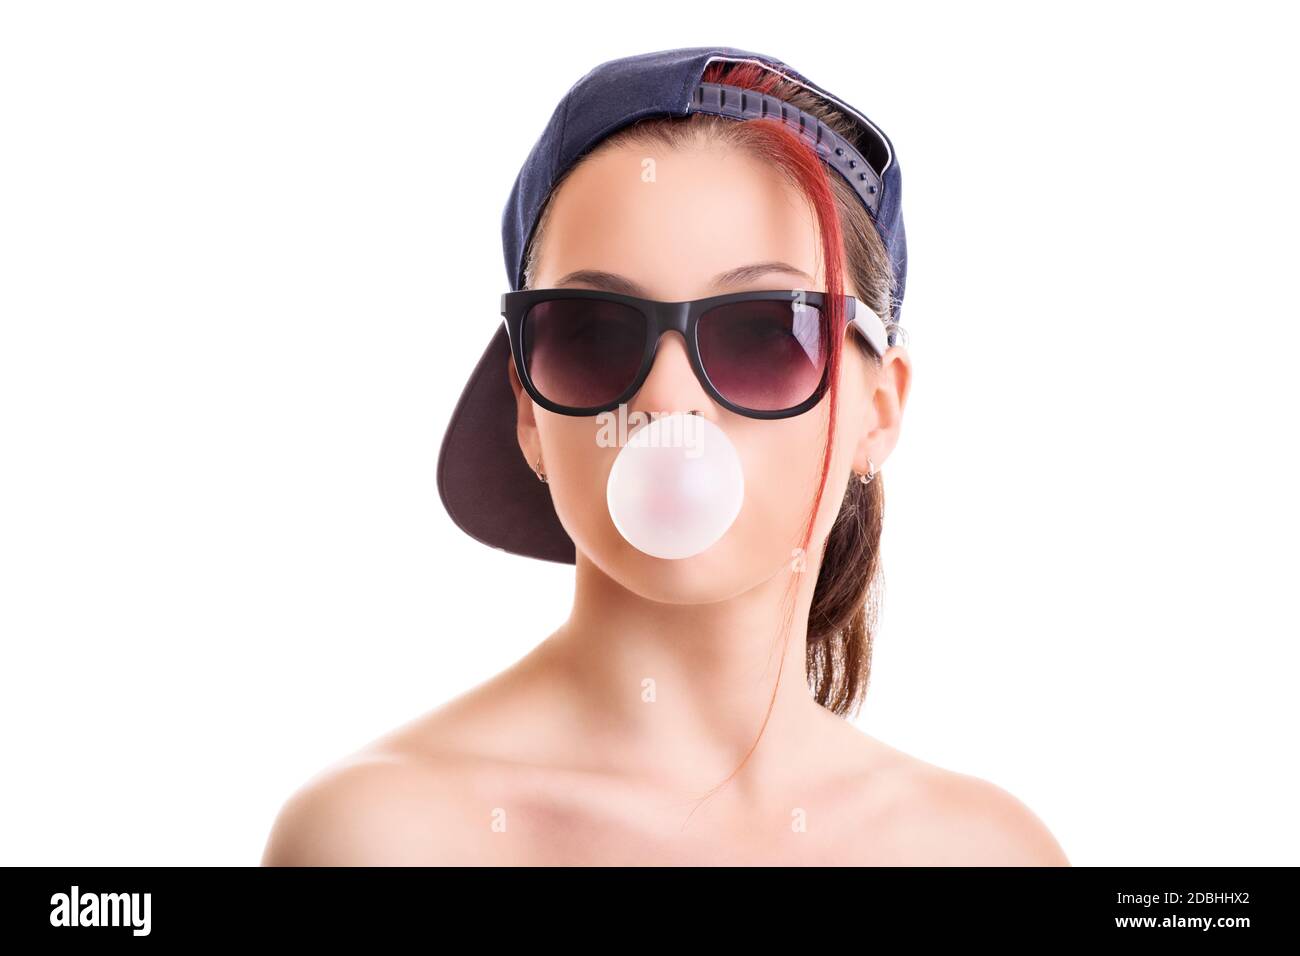 Beautiful stylish girl with backwards snapback cap and sunglasses, blowing a pink bubble with her chewing gum, isolated on white background. Stock Photo